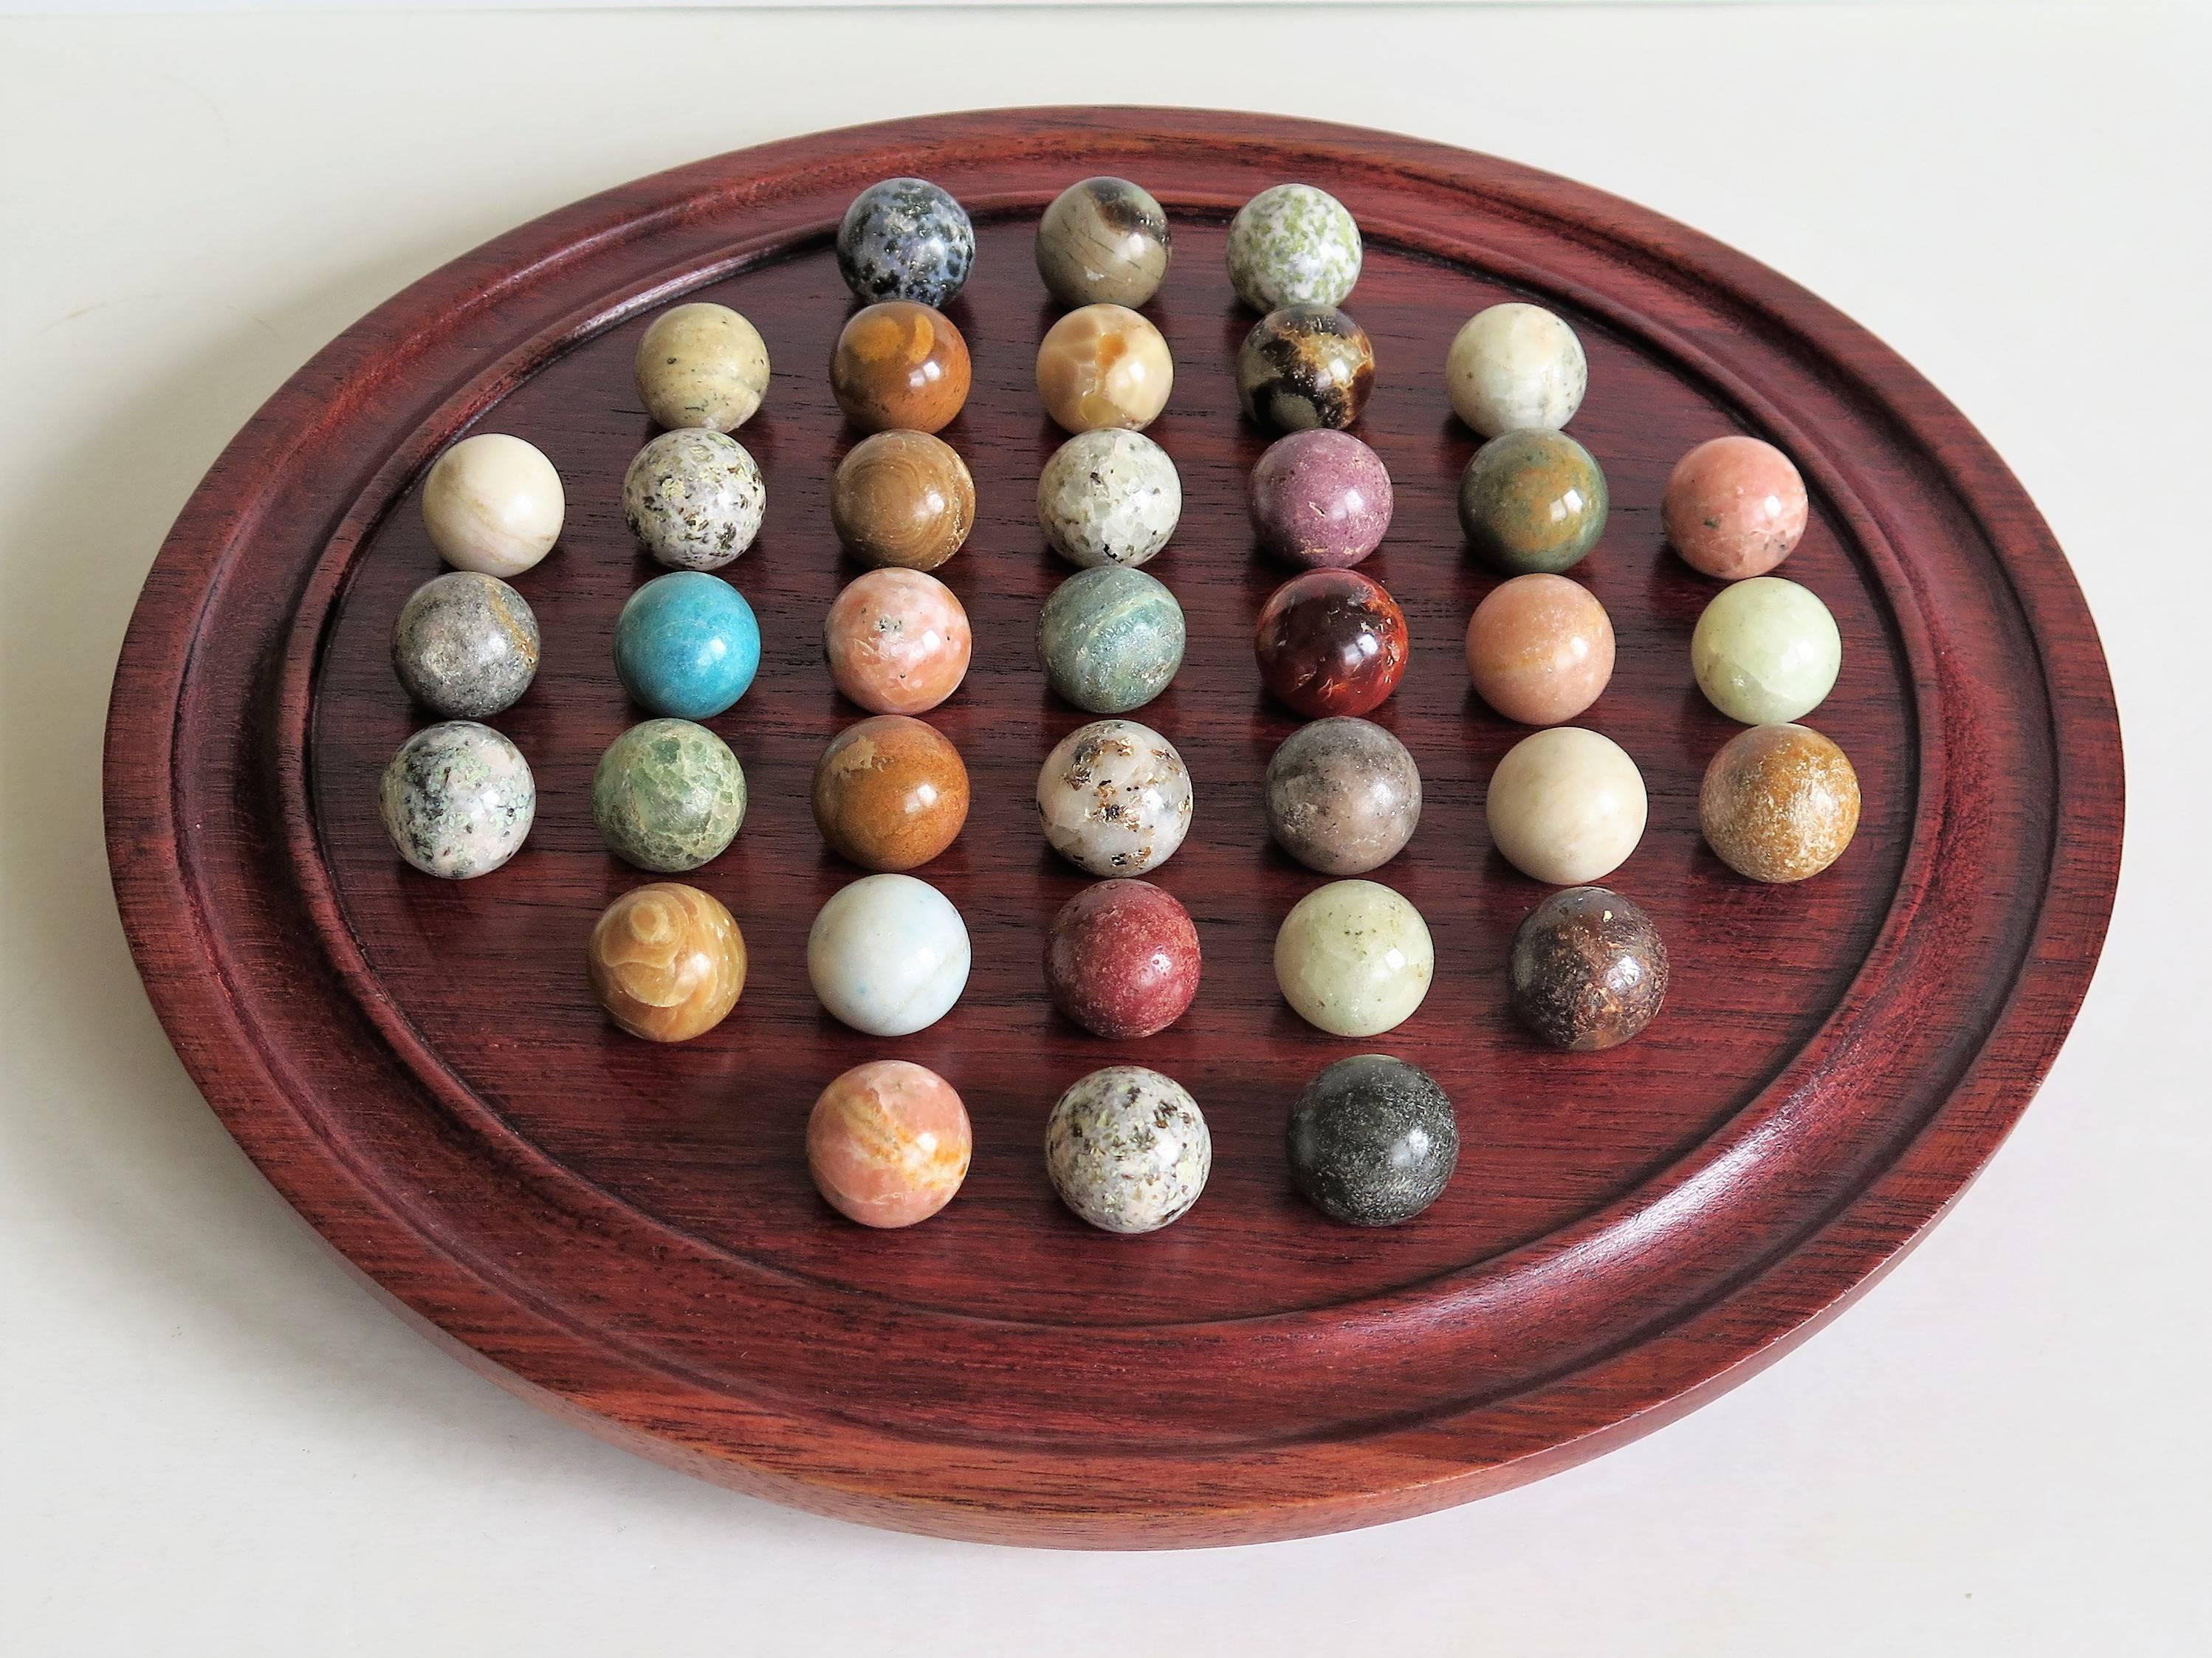 This is a complete Game of 37 hole marble solitaire with a hardwood board and 37 beautiful individual agate marbles, which we date to the early 20th century.

The circular turned board is made of Hardwood with a gallery to the outer rim. There are